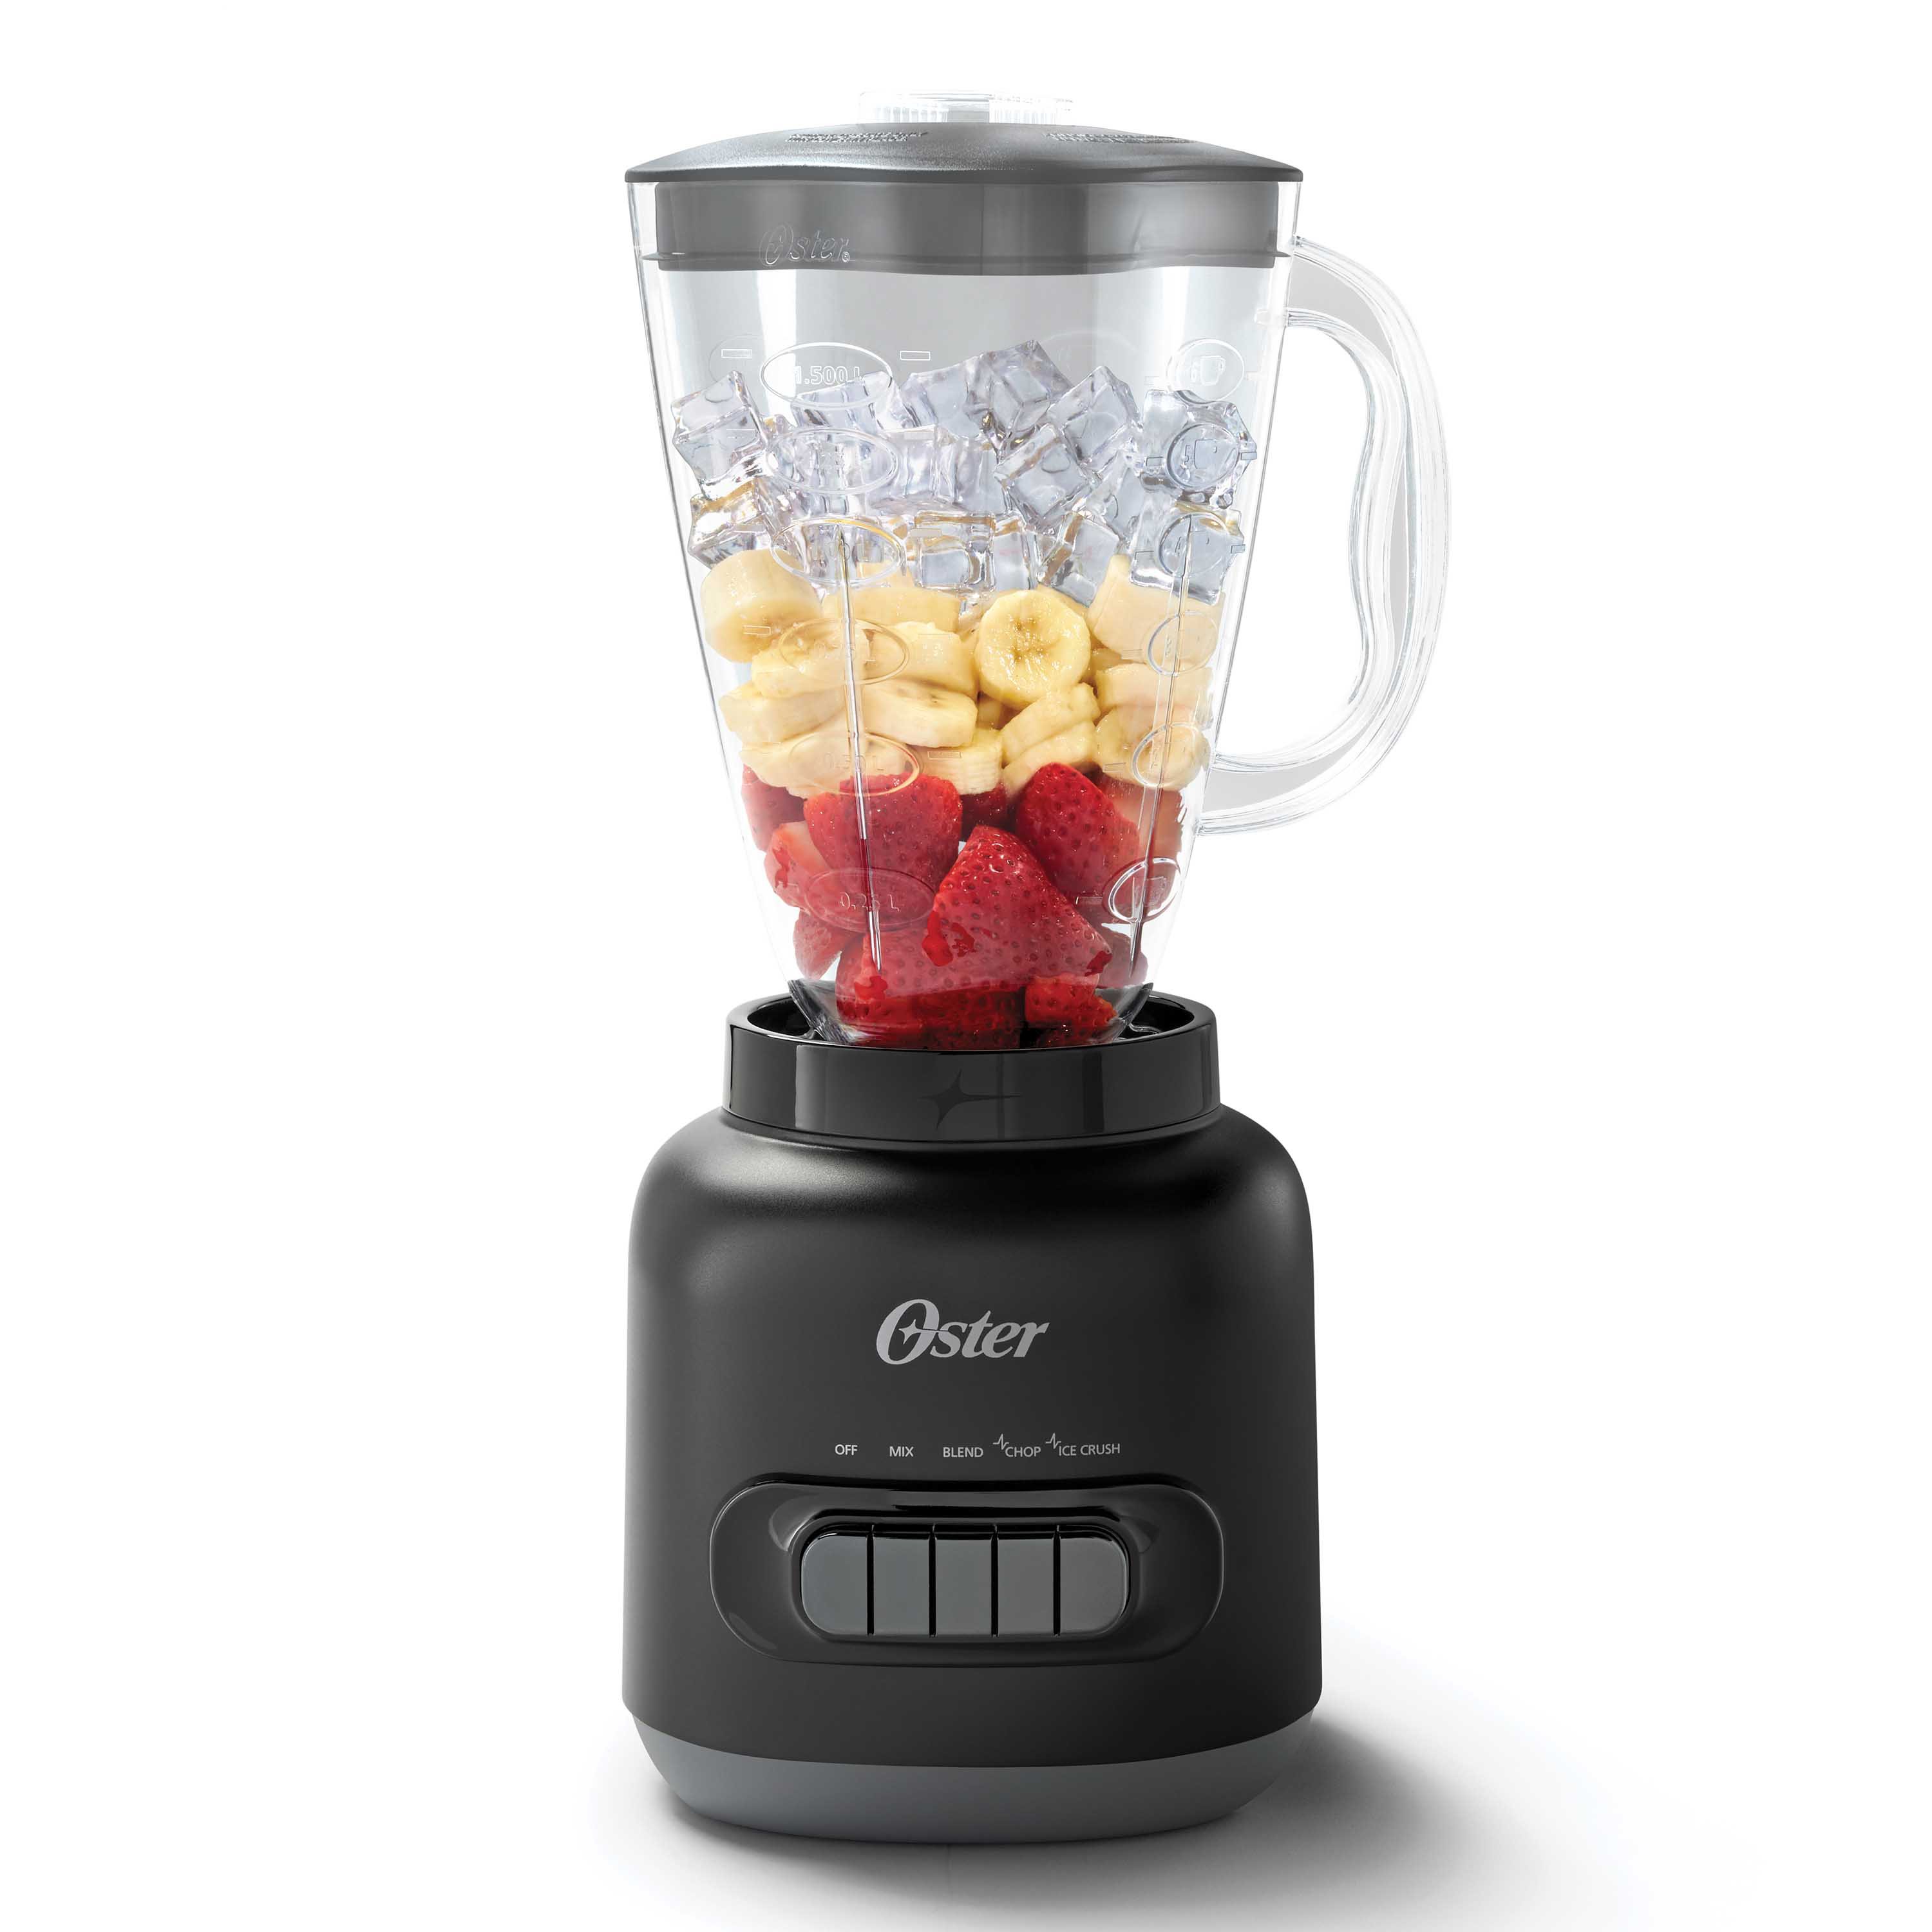 Oster Food Processor Review  Should You Buy It?! 